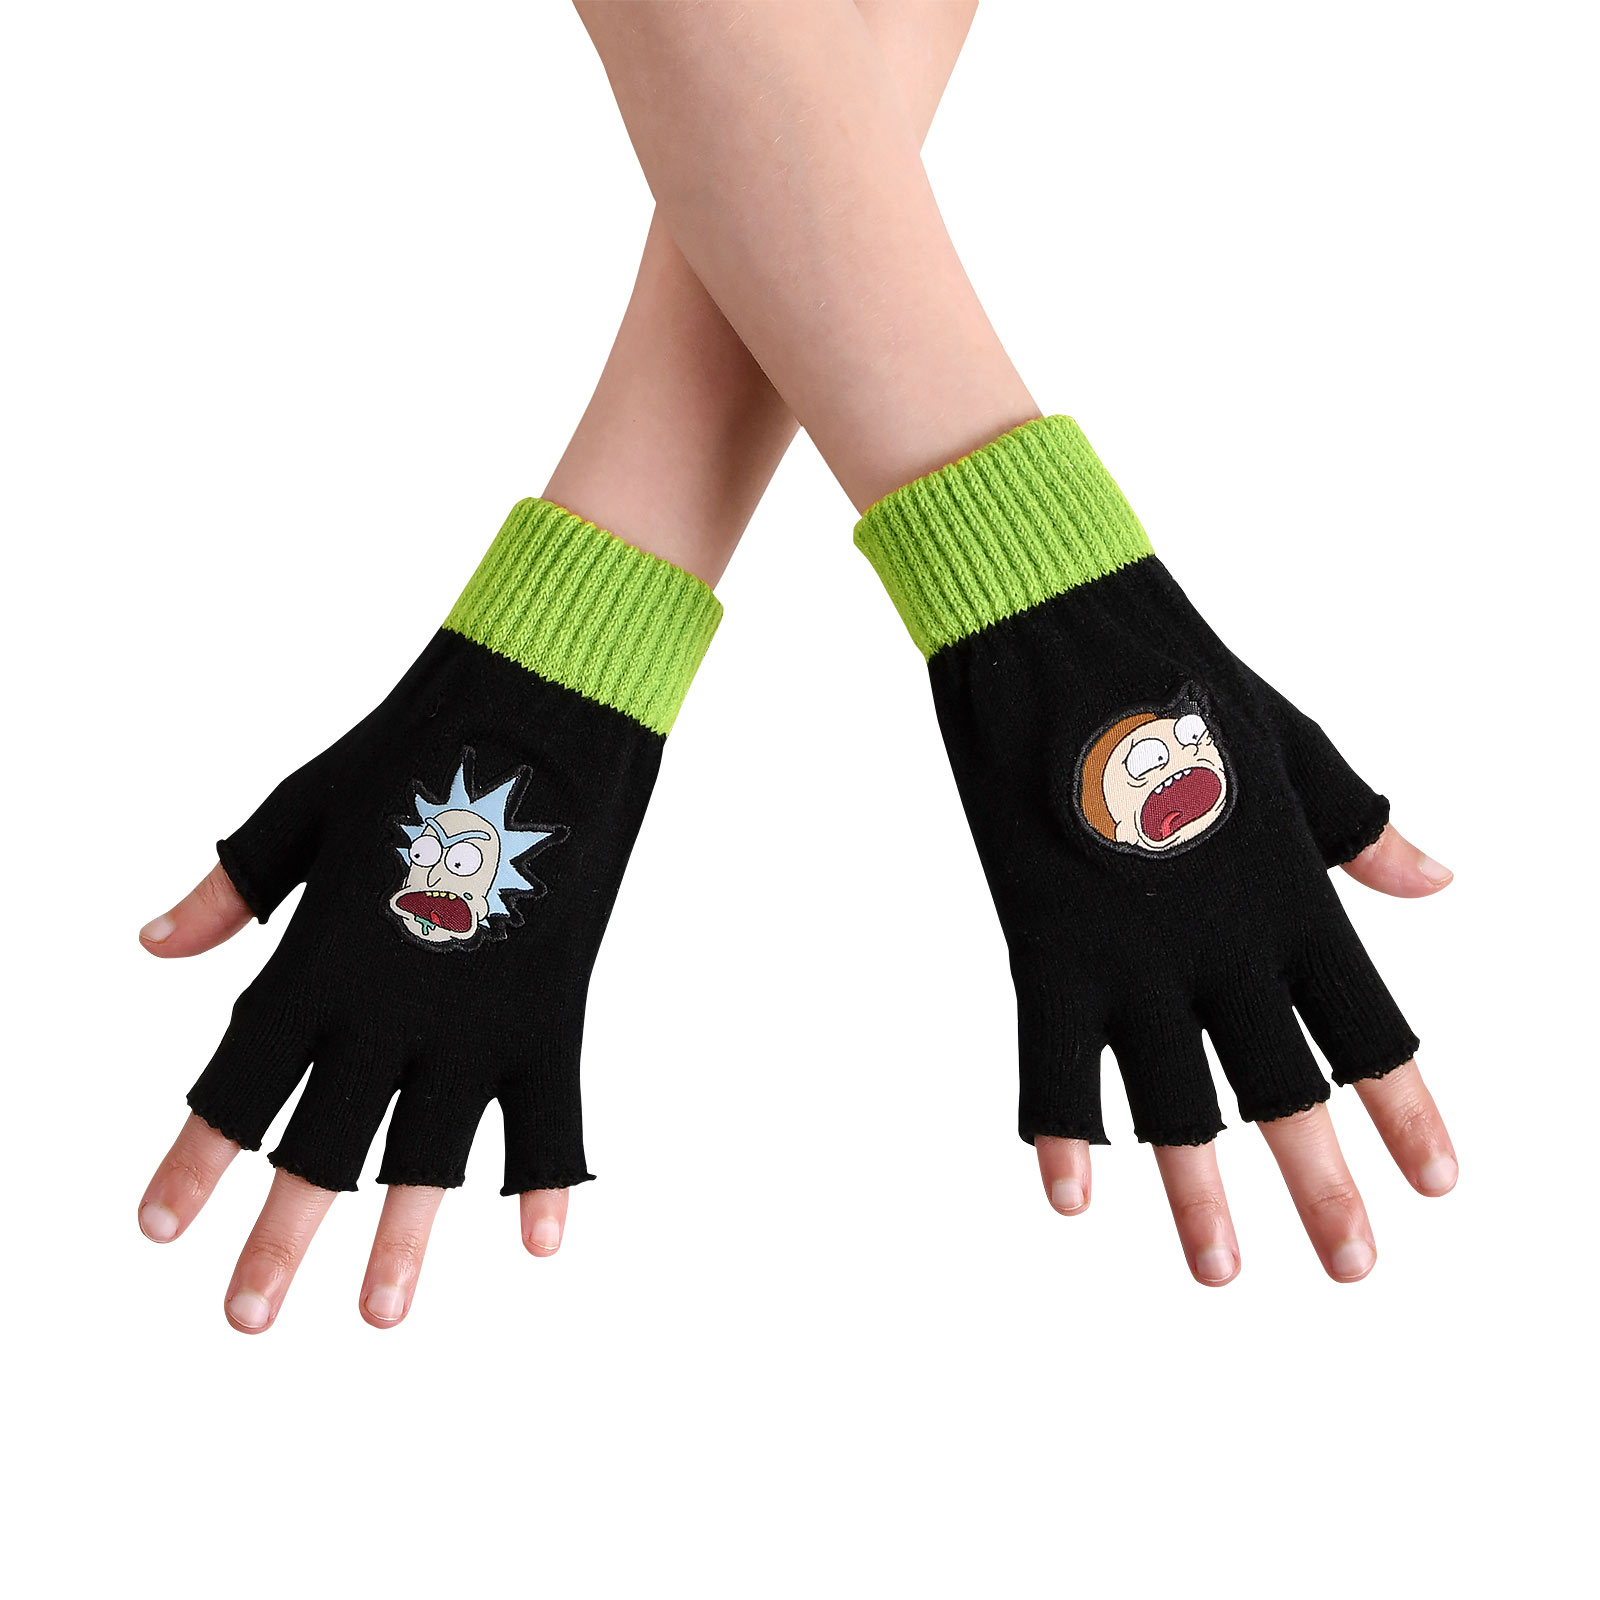 Rick and Morty - Fingerless Faces Gloves black